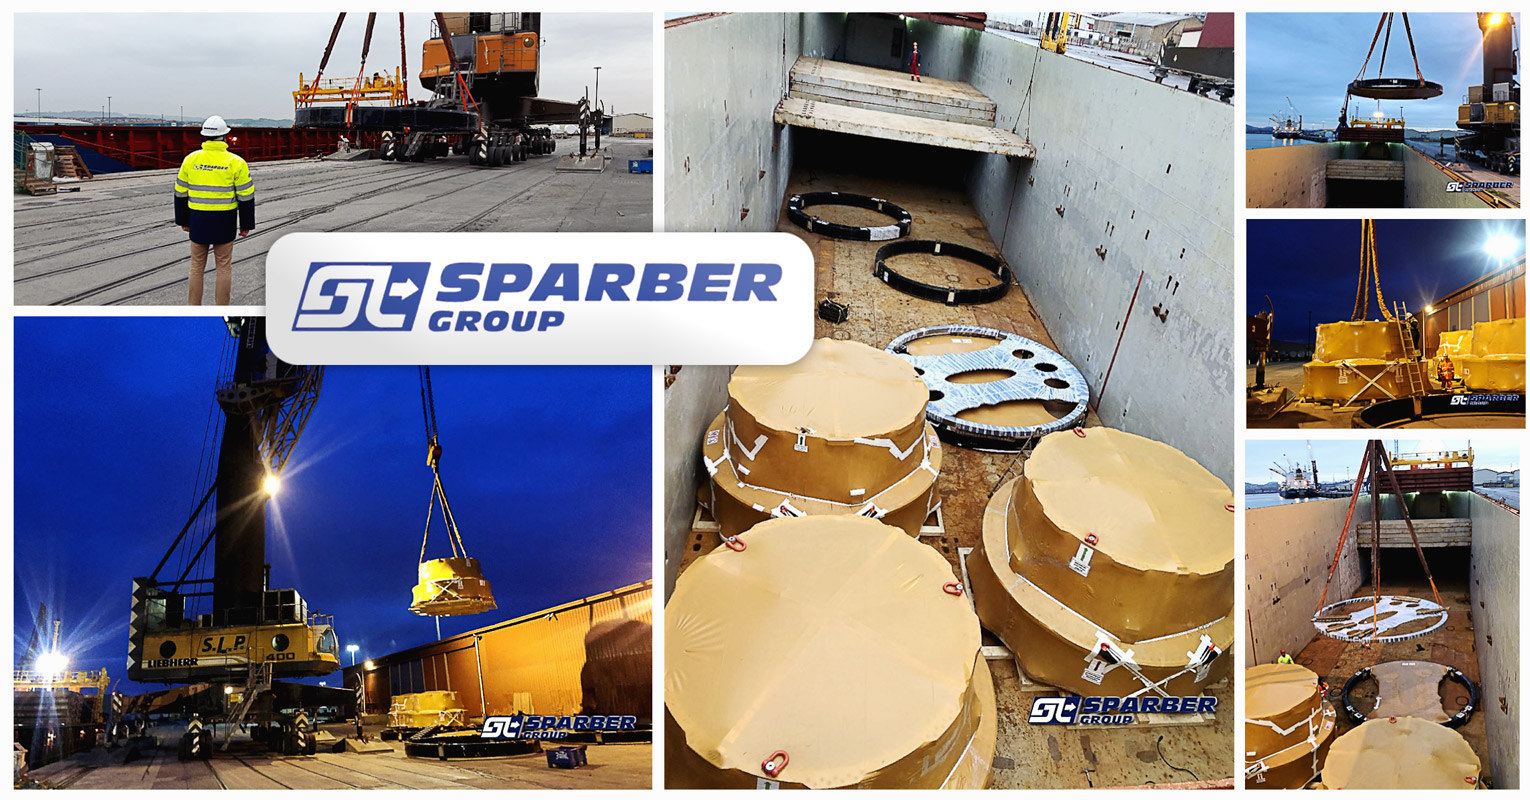 Sparber Handled a Total 220,90 tons